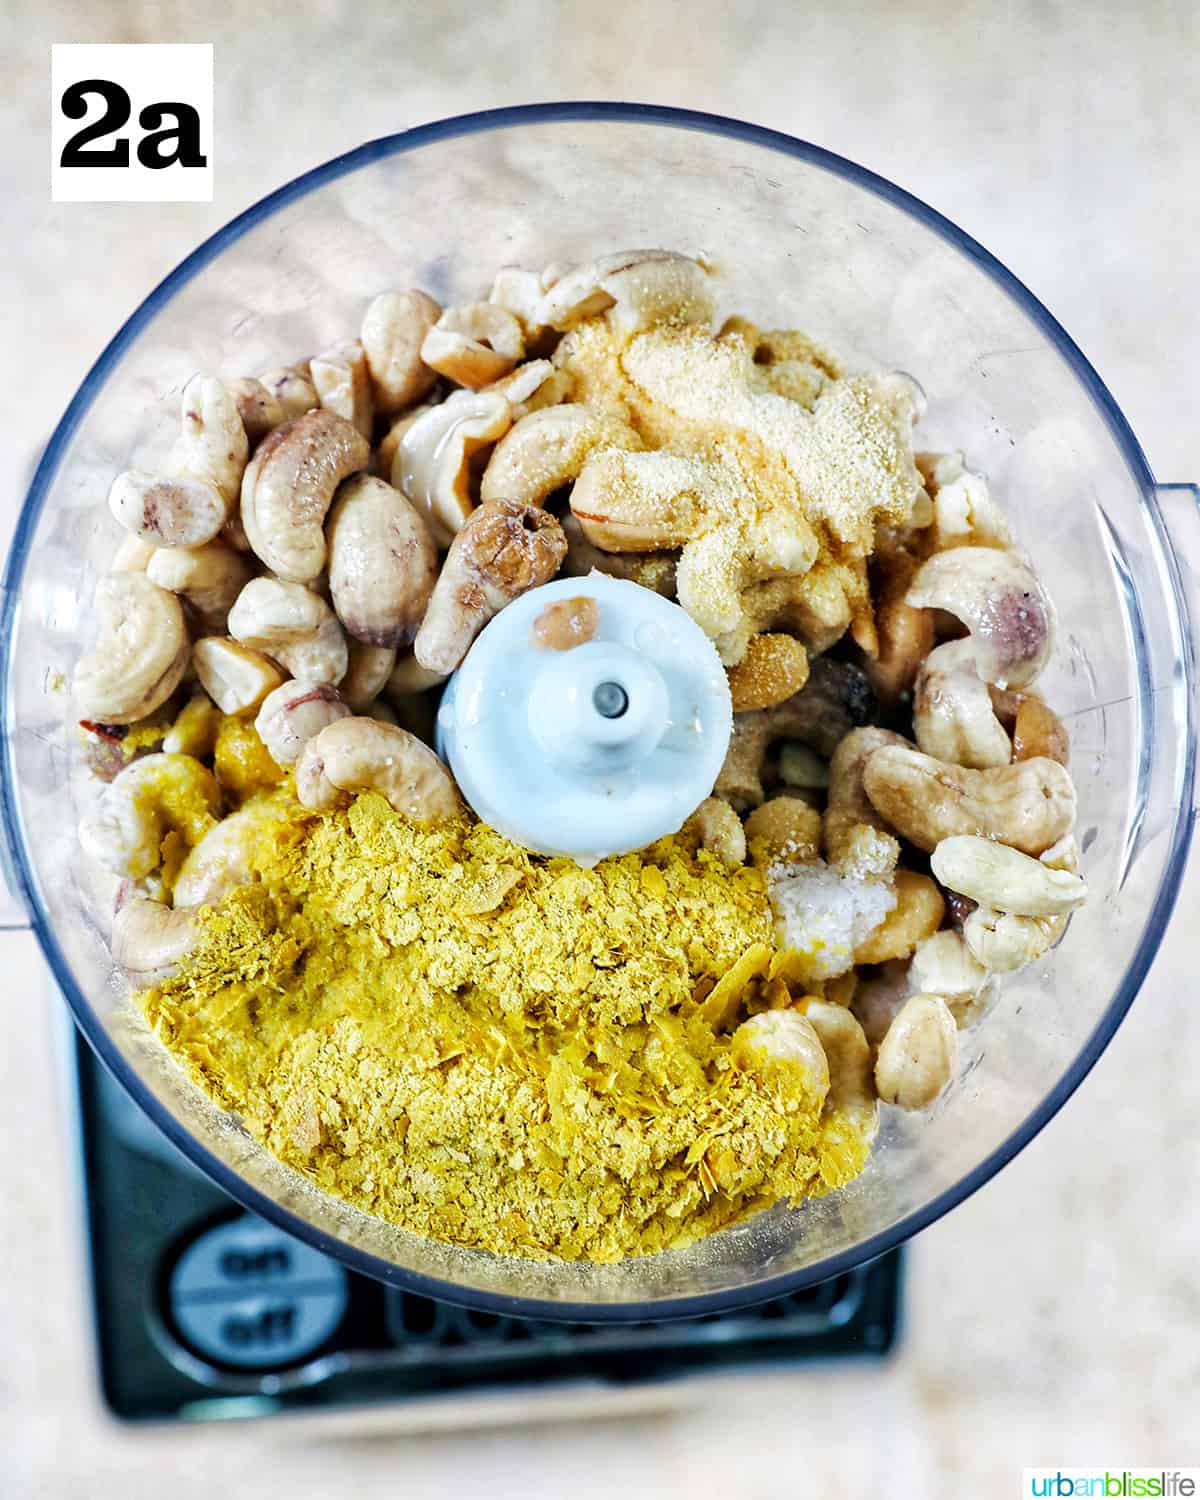 ingredients to make cashew cheese in a food processor.